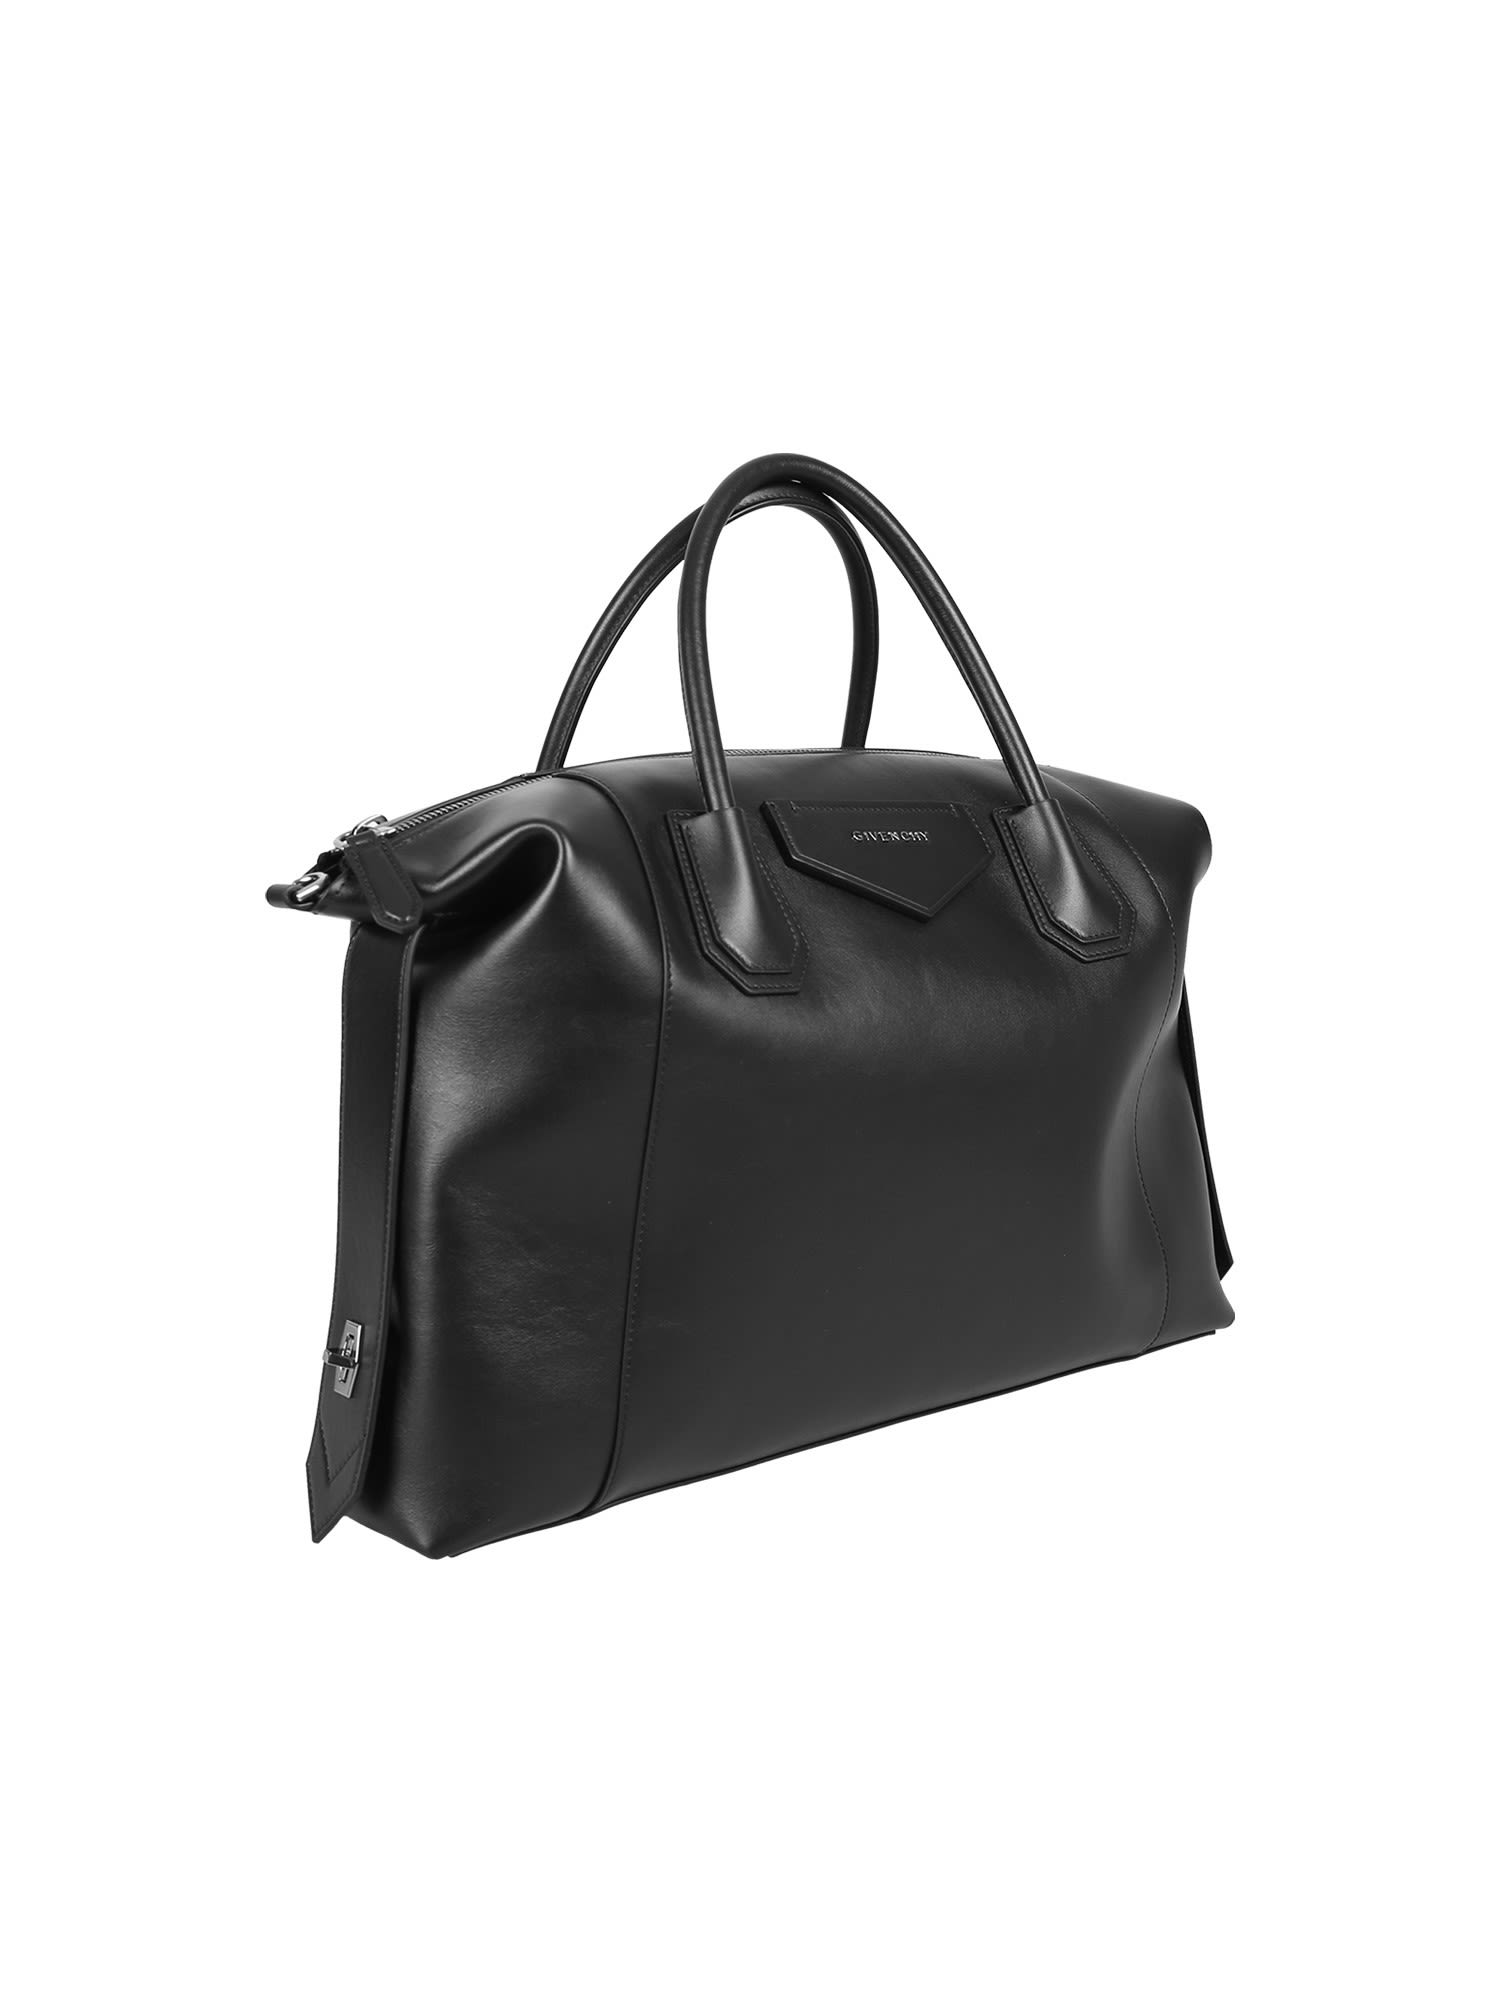 Givenchy Totes | italist, ALWAYS LIKE A SALE